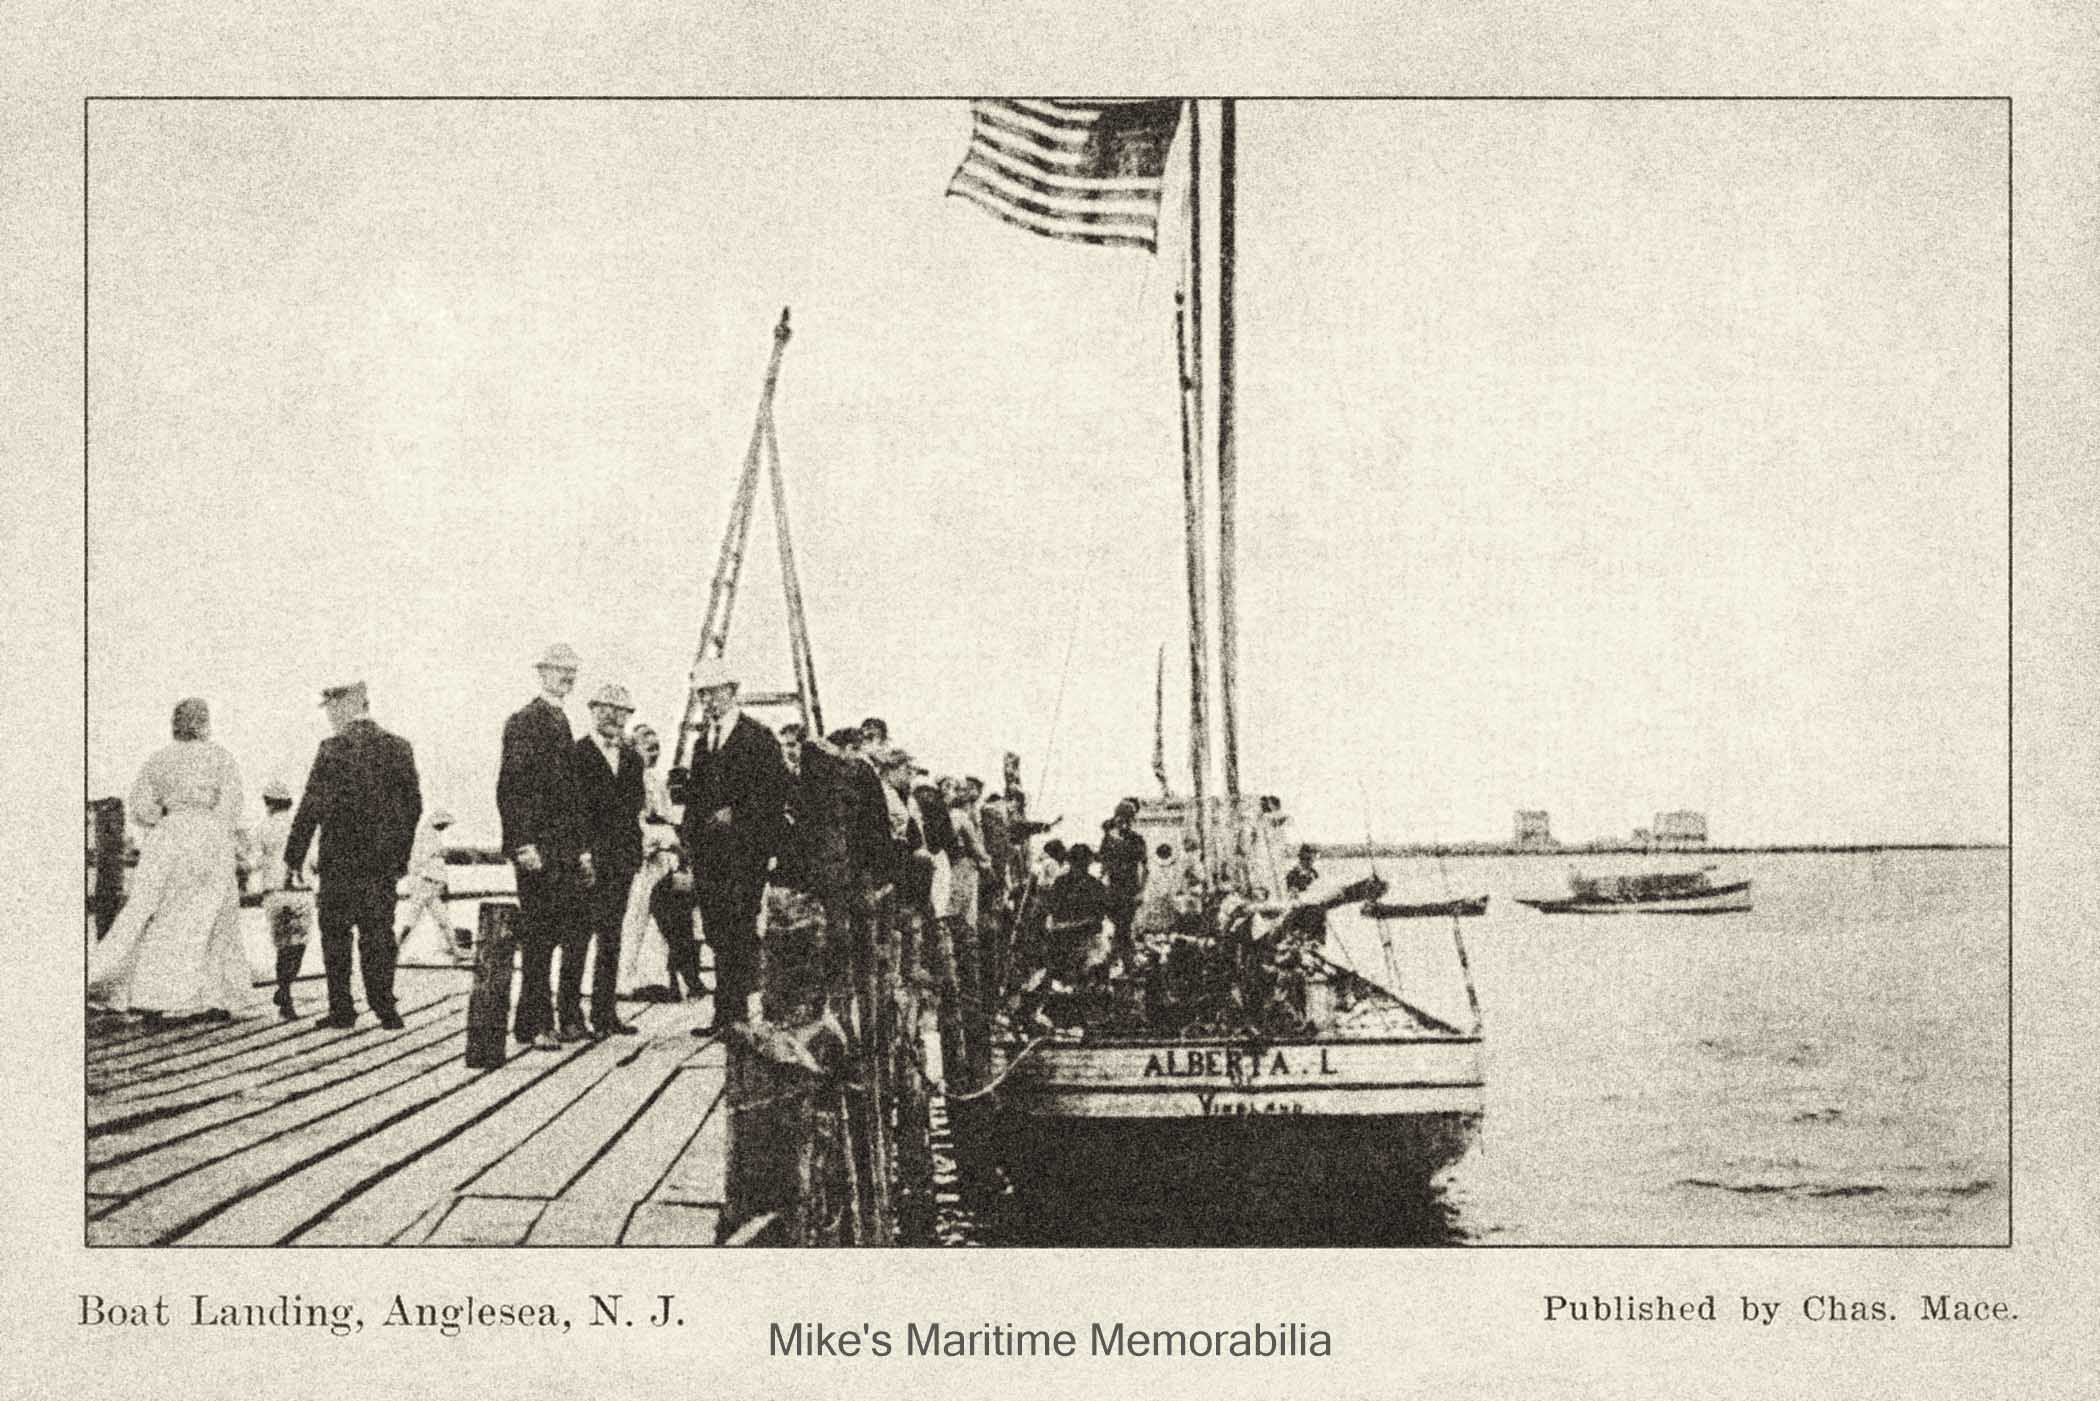 ALBERTA L., Anglesea, NJ – 1906 The "ALBERTA L." from Mace's Pier at Anglesea, NJ circa 1906. Built in 1903 at Vineland, NJ, she was one of the many gasoline-powered sloops to go to the fishing banks on a daily schedule. She was built as a sailing vessel and still had her masts and sails, but relied on her engine for propulsion.